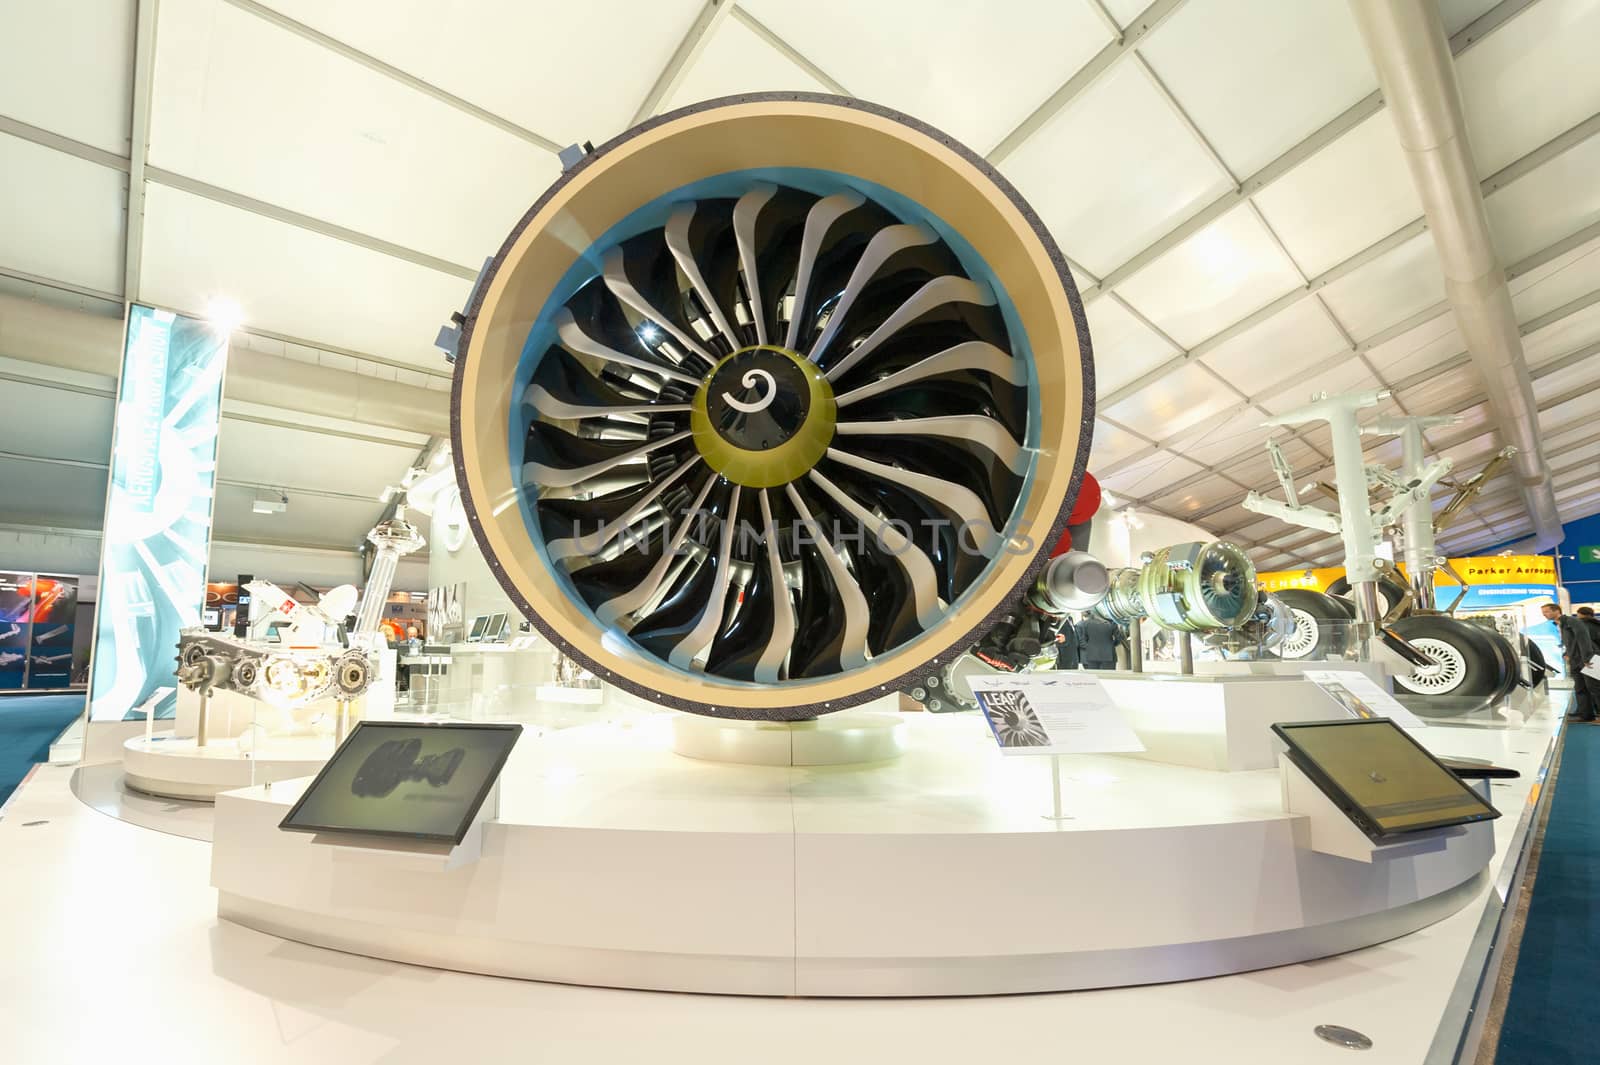 Farnborough, UK - July 12, 2012: Exhibition stands displaying jet engines and other components used in the aviation industry at Farnborough International Airshow, UK